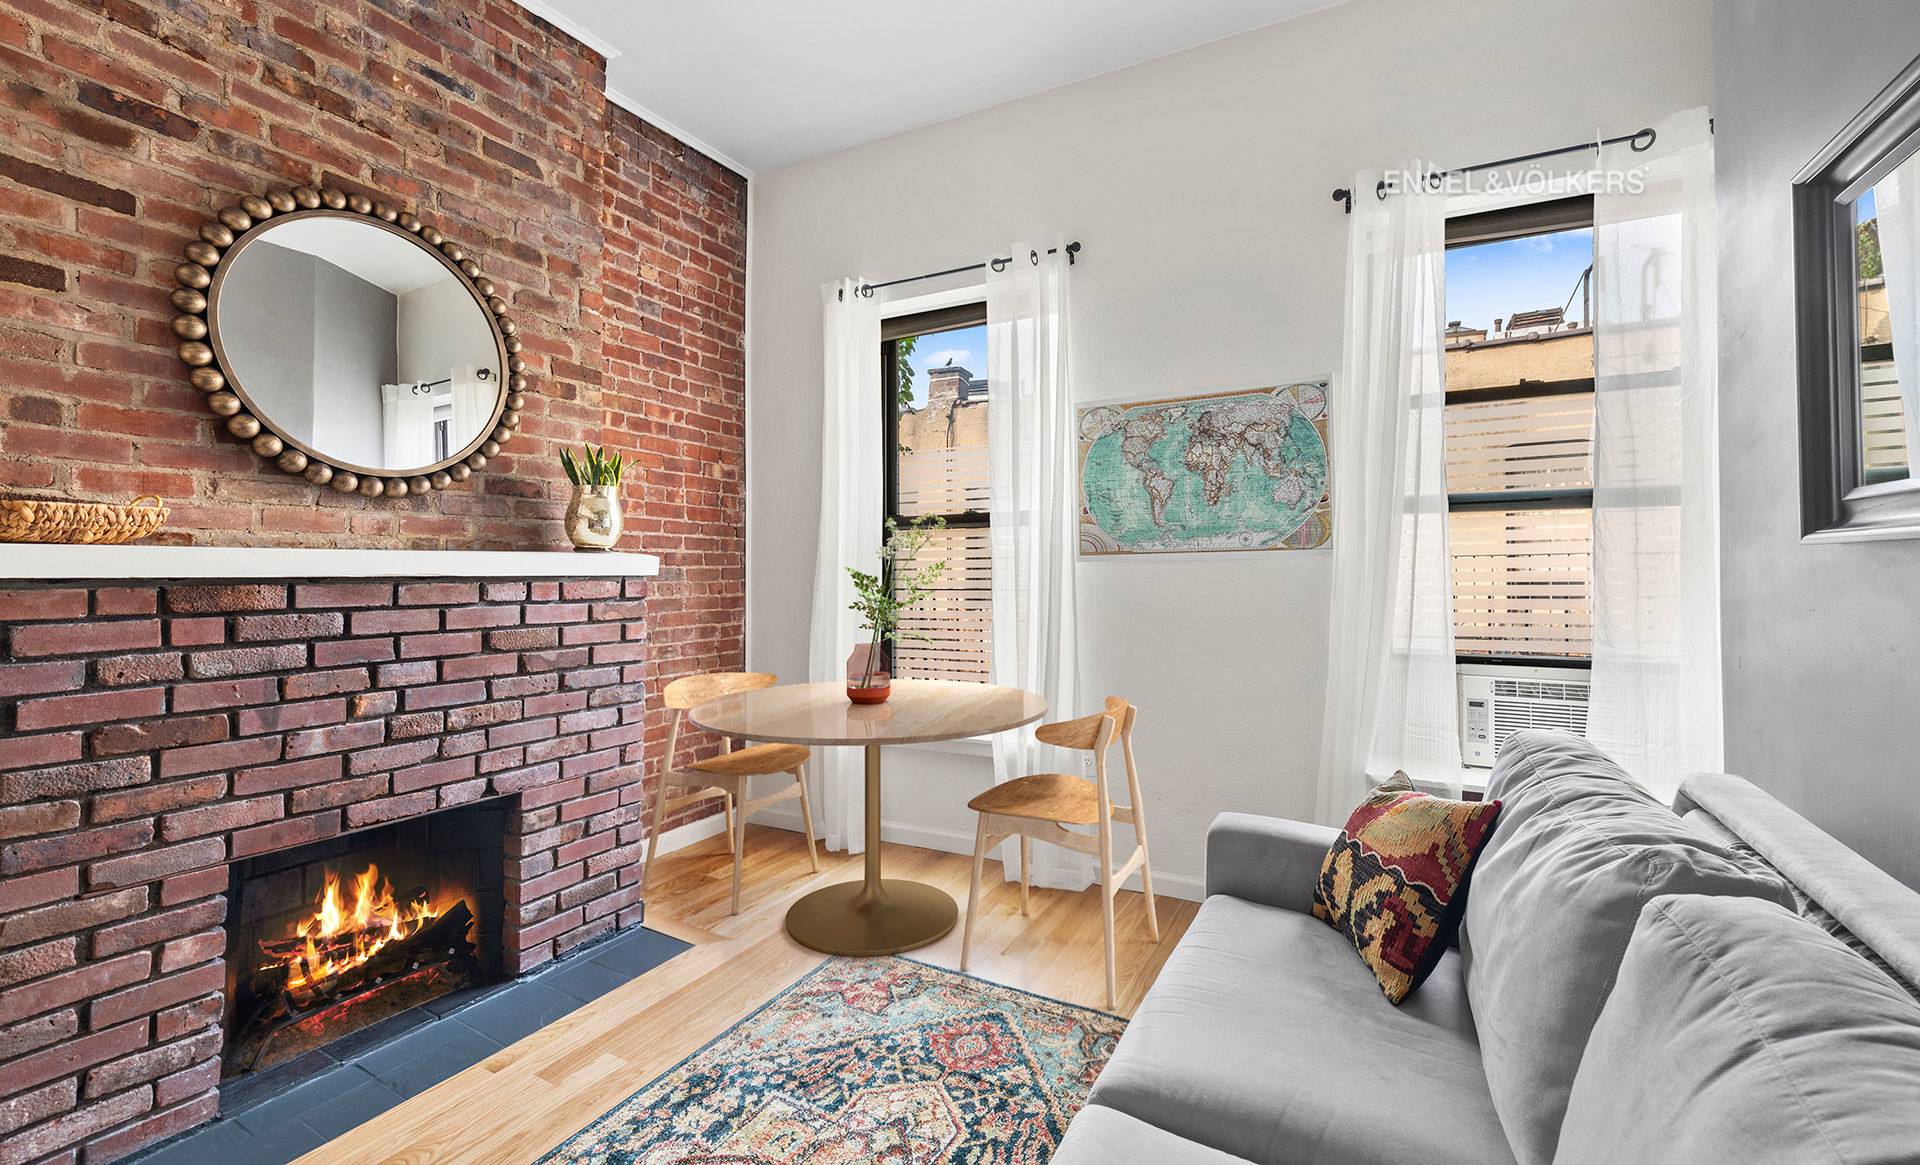 Perched on picturesque, tree lined Jane Street, Apartment 5C offers quintessential West Village charm with 11 ft ceilings, a rare wood burning fireplace, and sun filled skyline views.